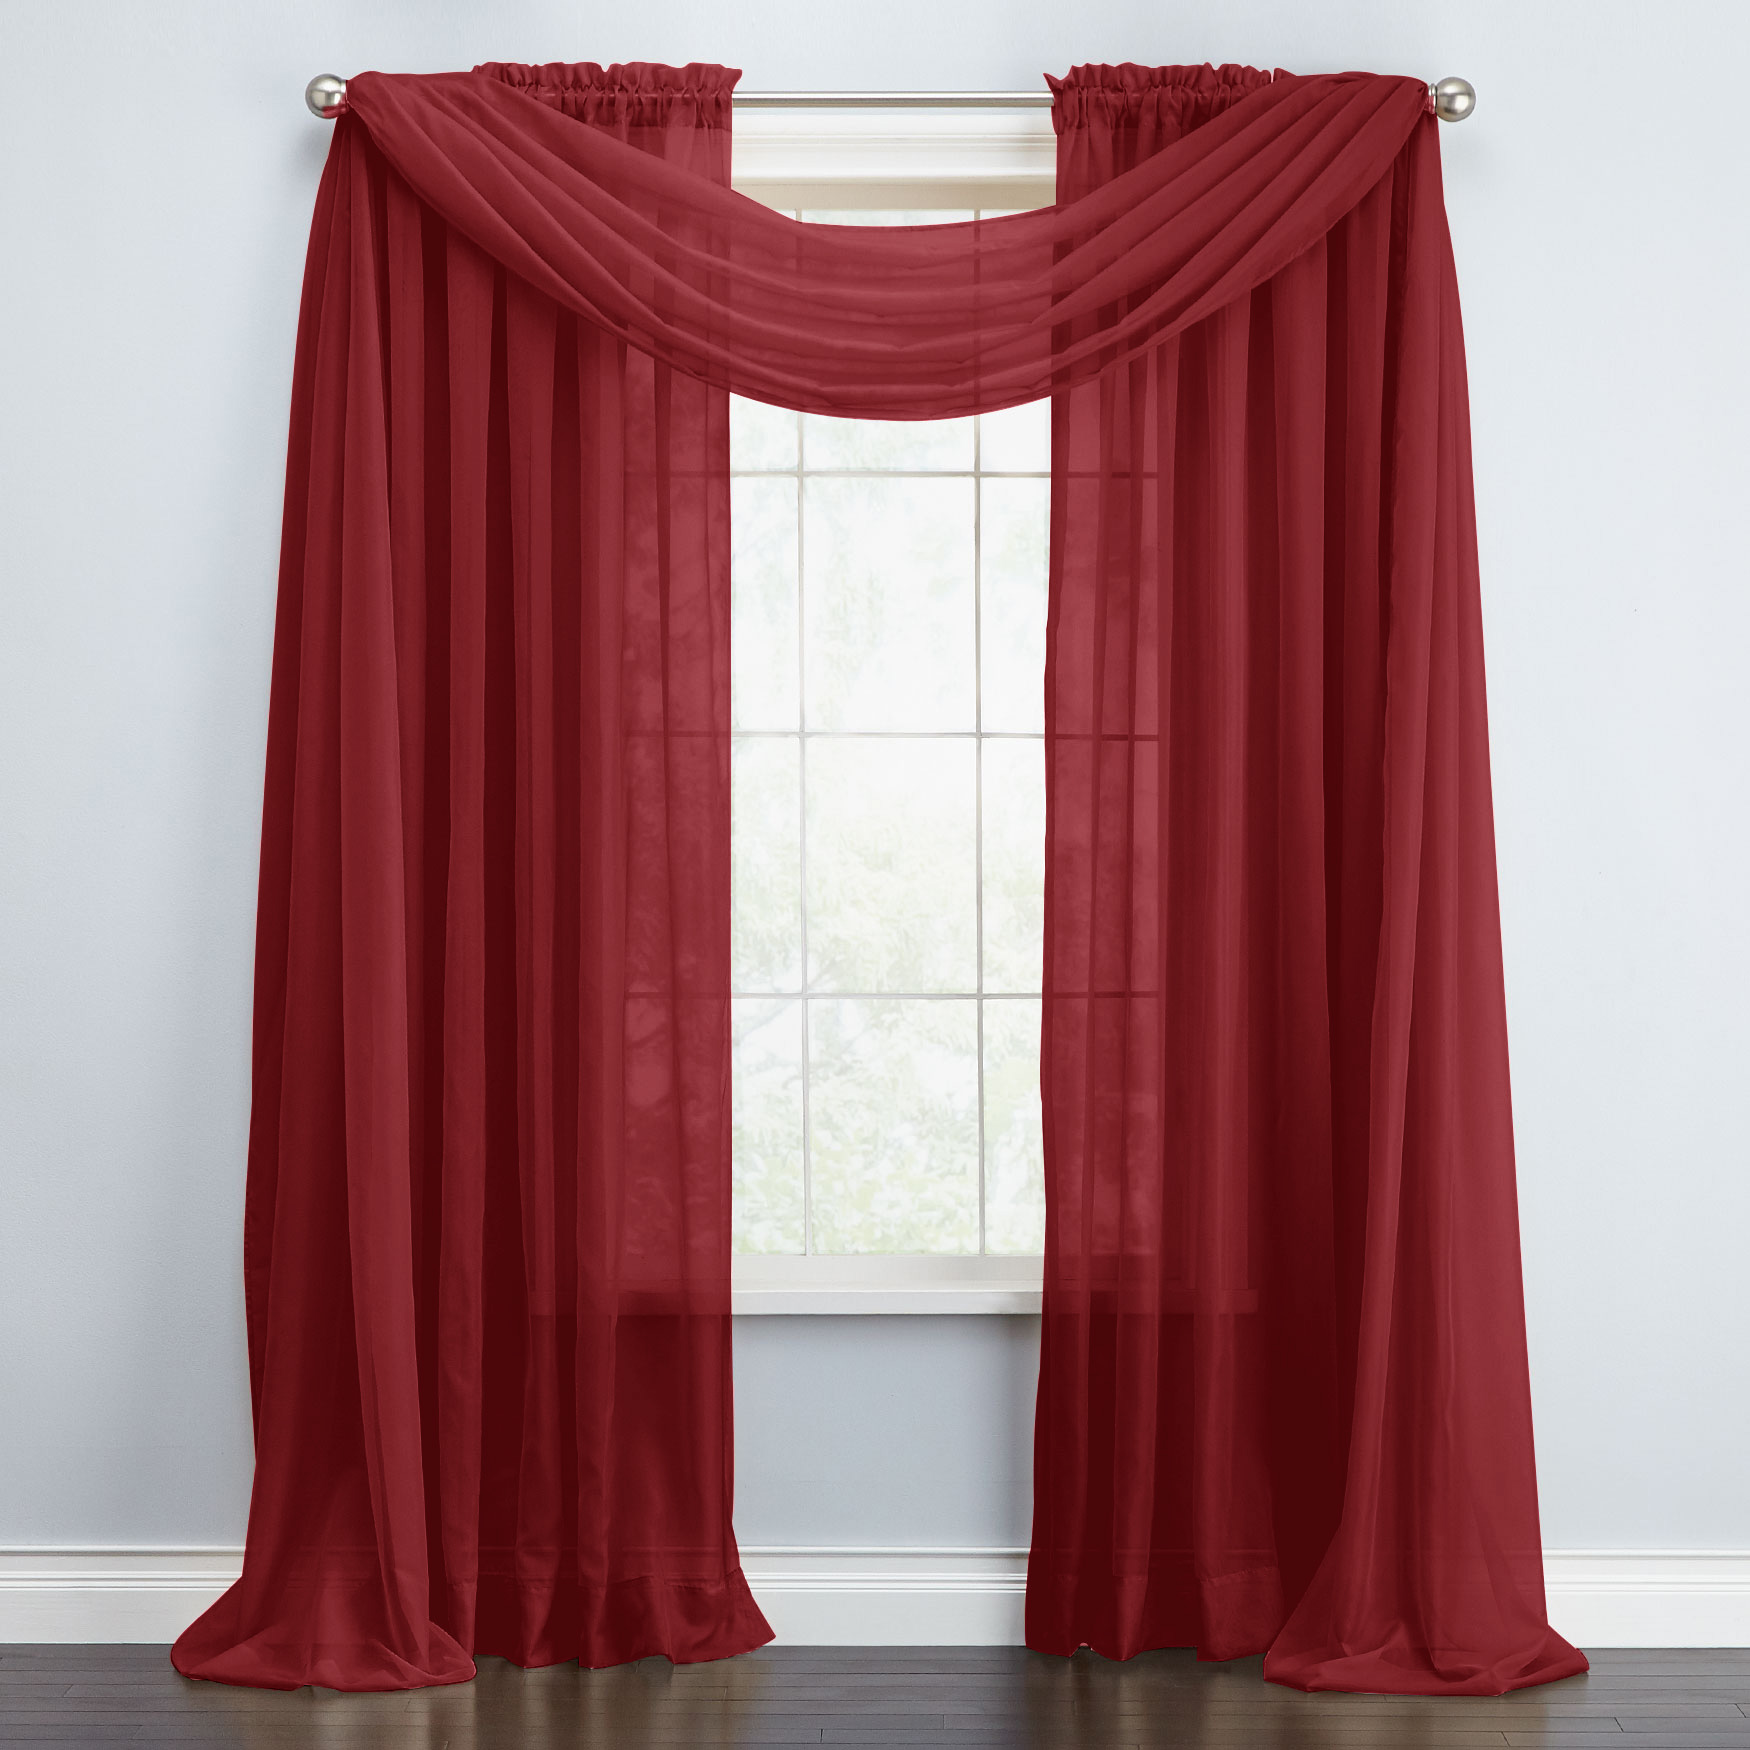 Fuchsia HOT PINK  SCARF SHEER VOILE WINDOW TREATMENT CURTAIN DRAPES VALANCE 